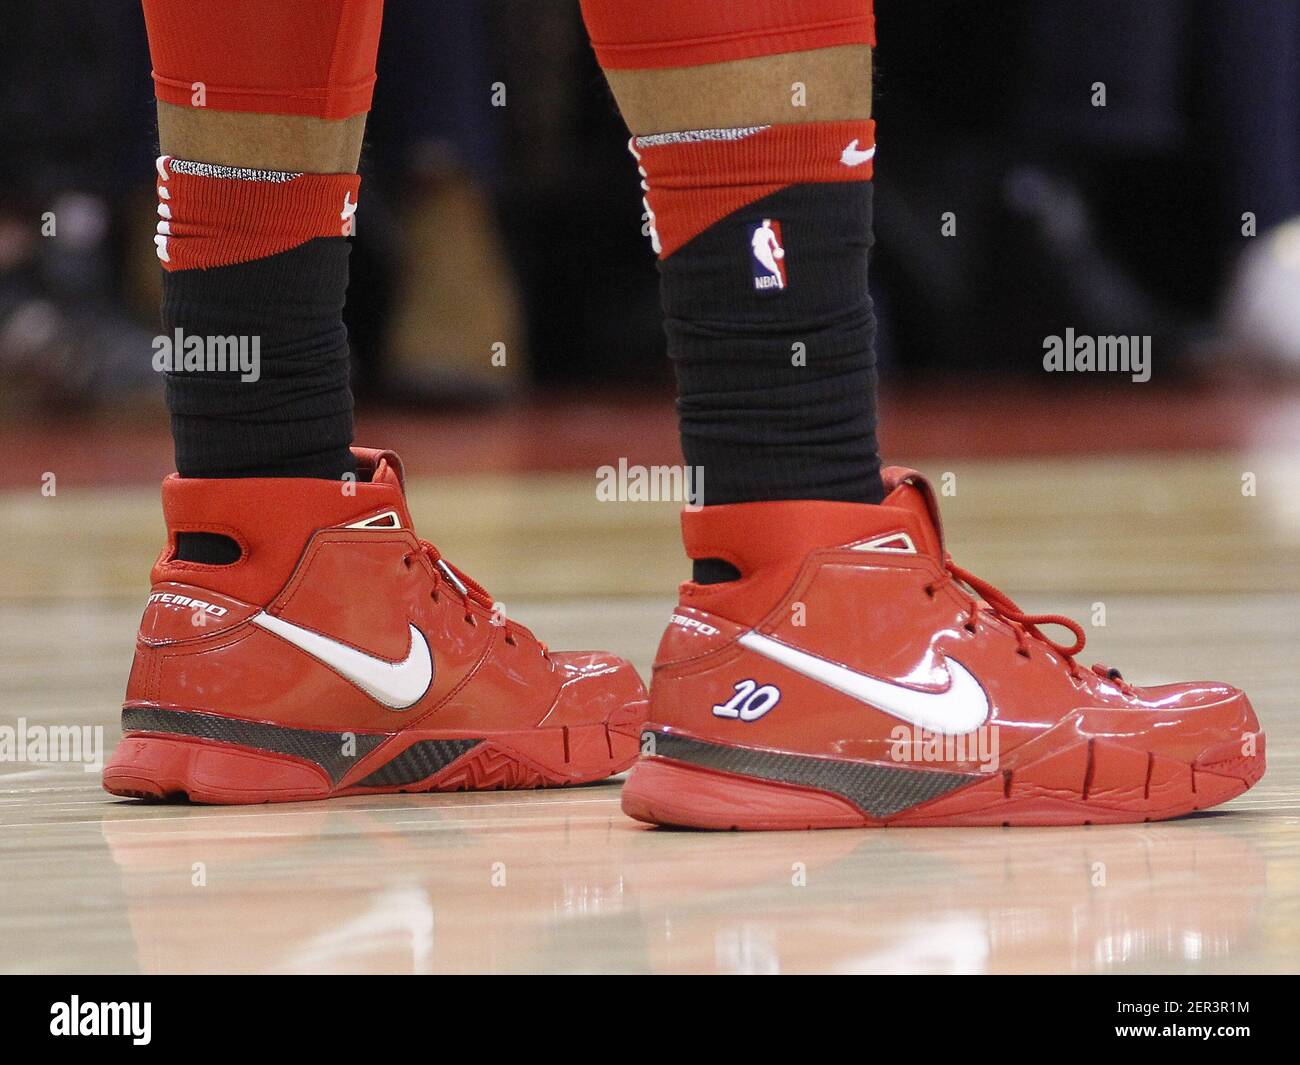 Apr 4, 2018; Toronto, Ontario, CAN; The shoes f Toronto Raptors guard DeMar  DeRozan (10) during a game against the Boston Celtics at the Air Canada  Centre. Toronto defeated Boston. Mandatory Credit: